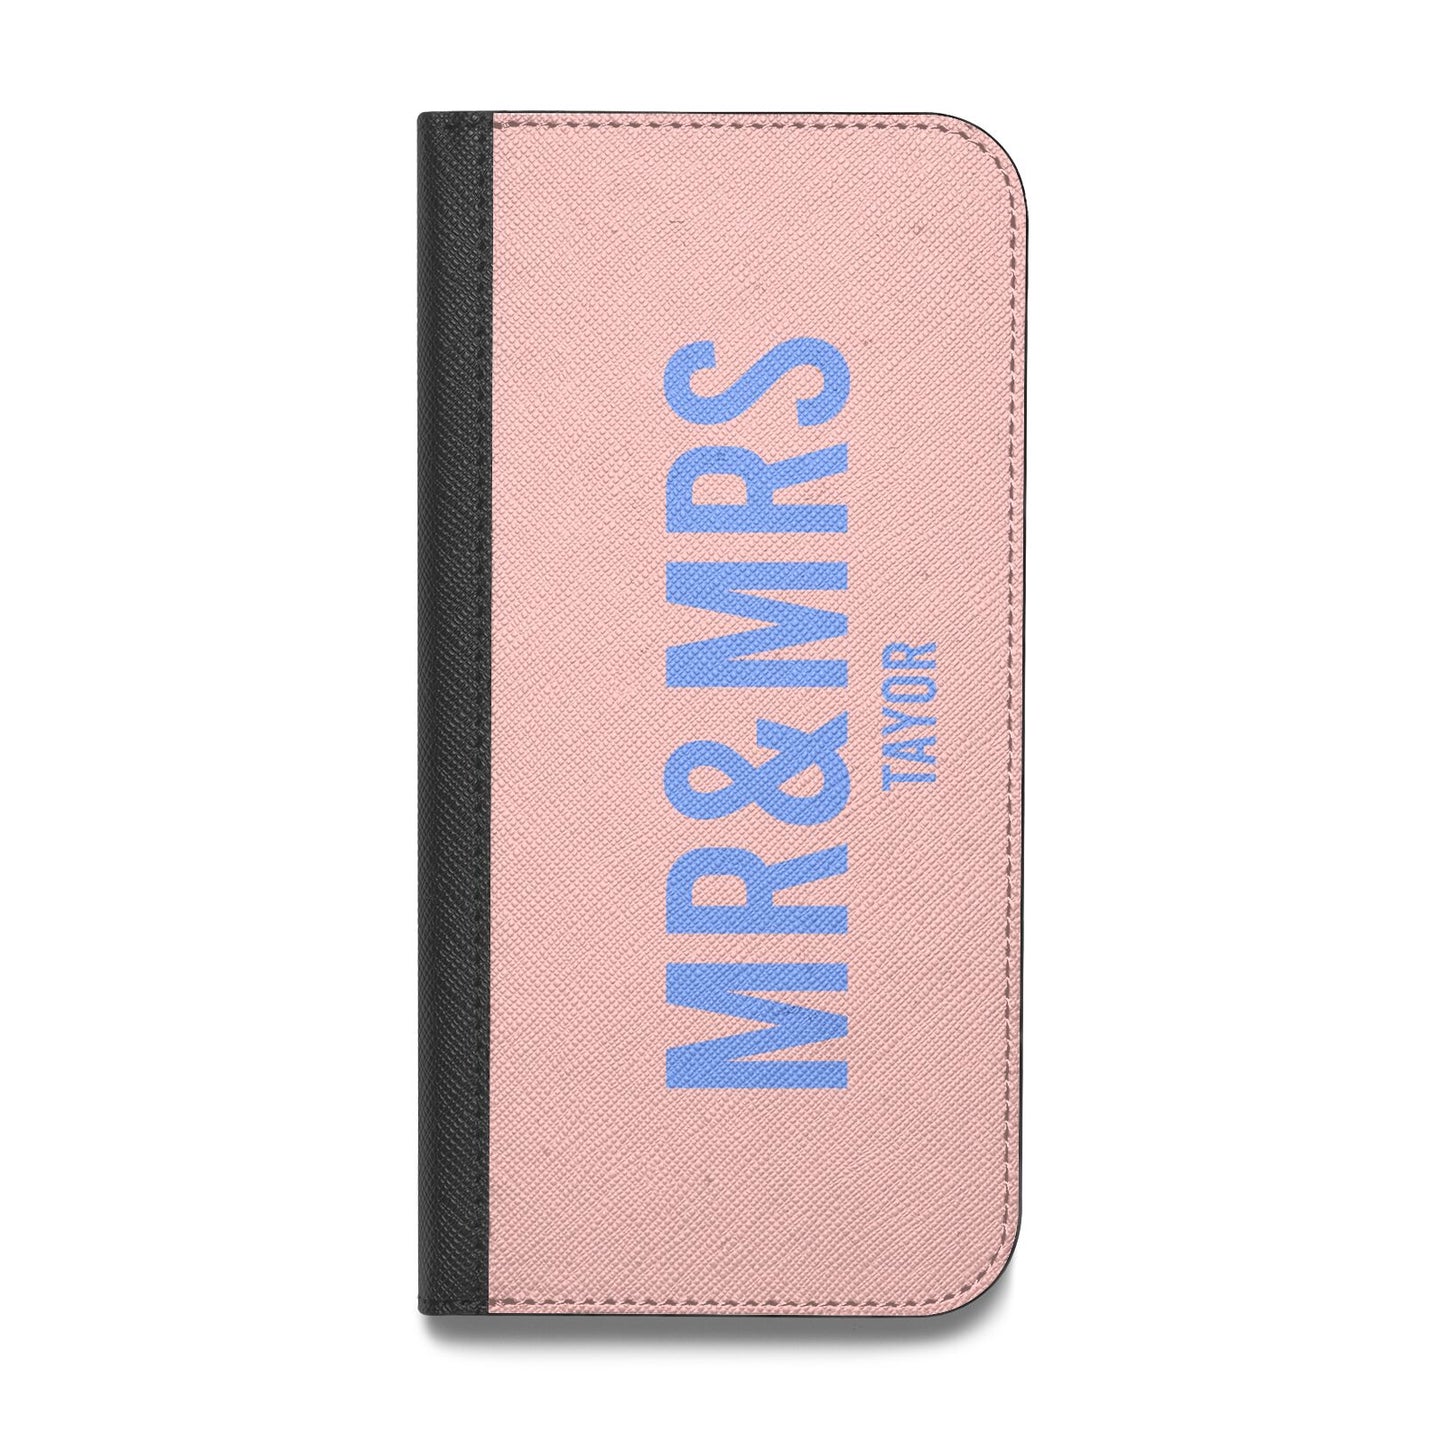 Personalised Mr and Mrs Vegan Leather Flip iPhone Case